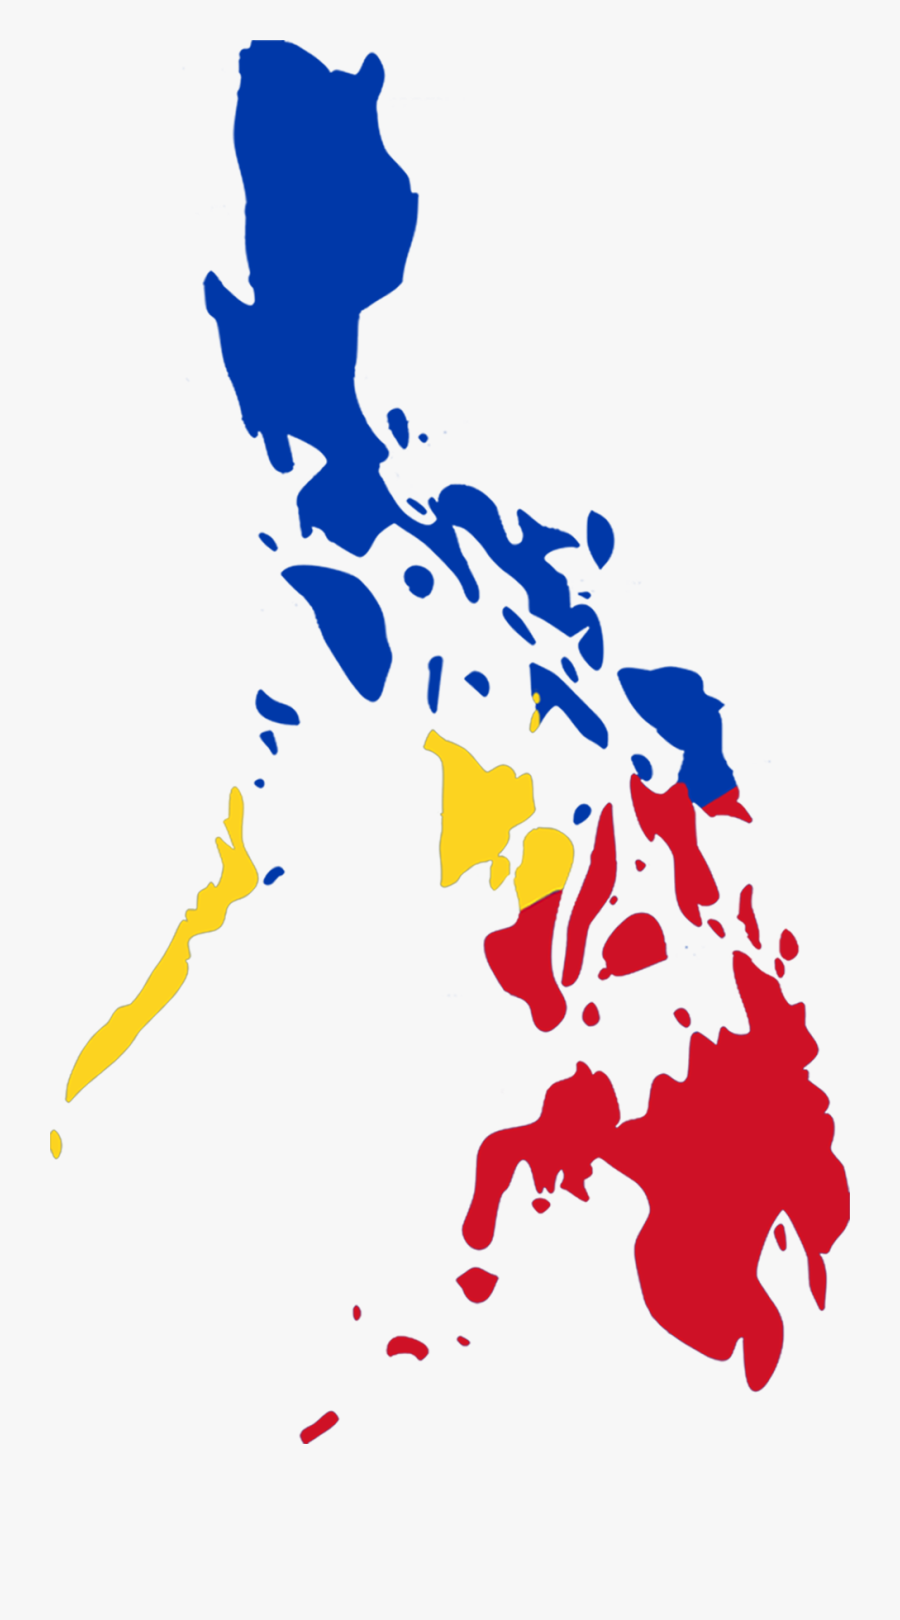 Philippine Map Png Hd, Transparent Clipart